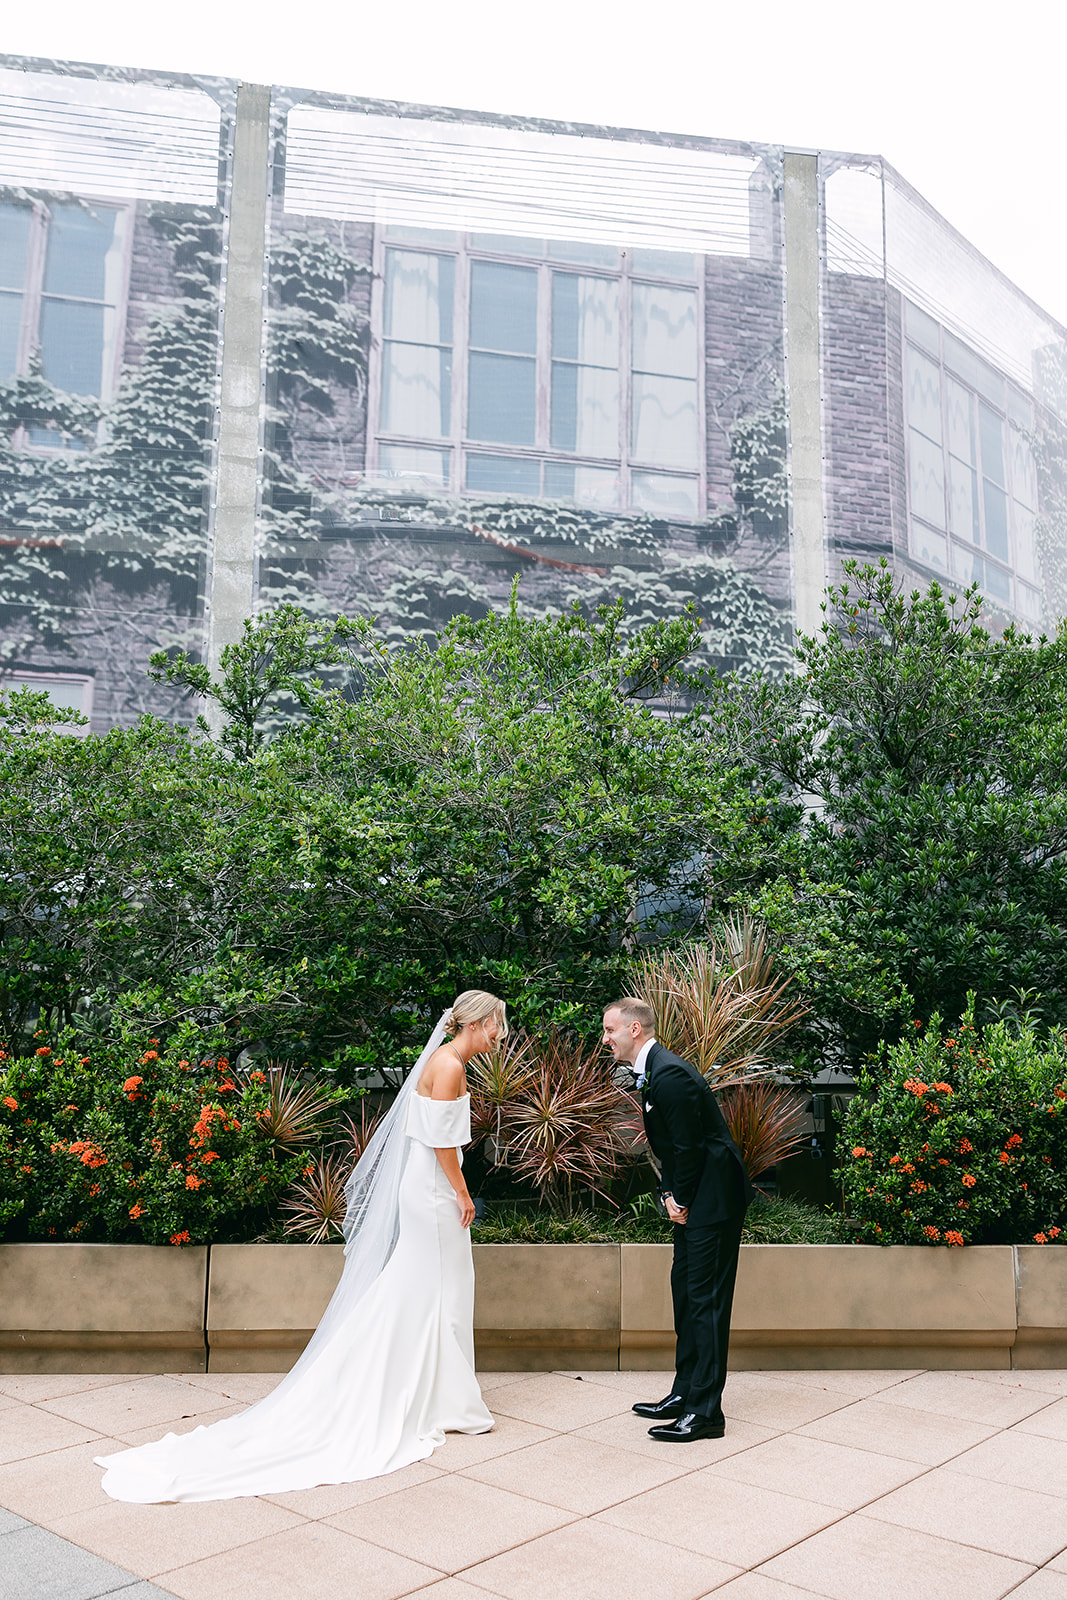 bride and groom first look wedding reveal. high end elopement wedding in tampa florida. sarah bradshaw photography.